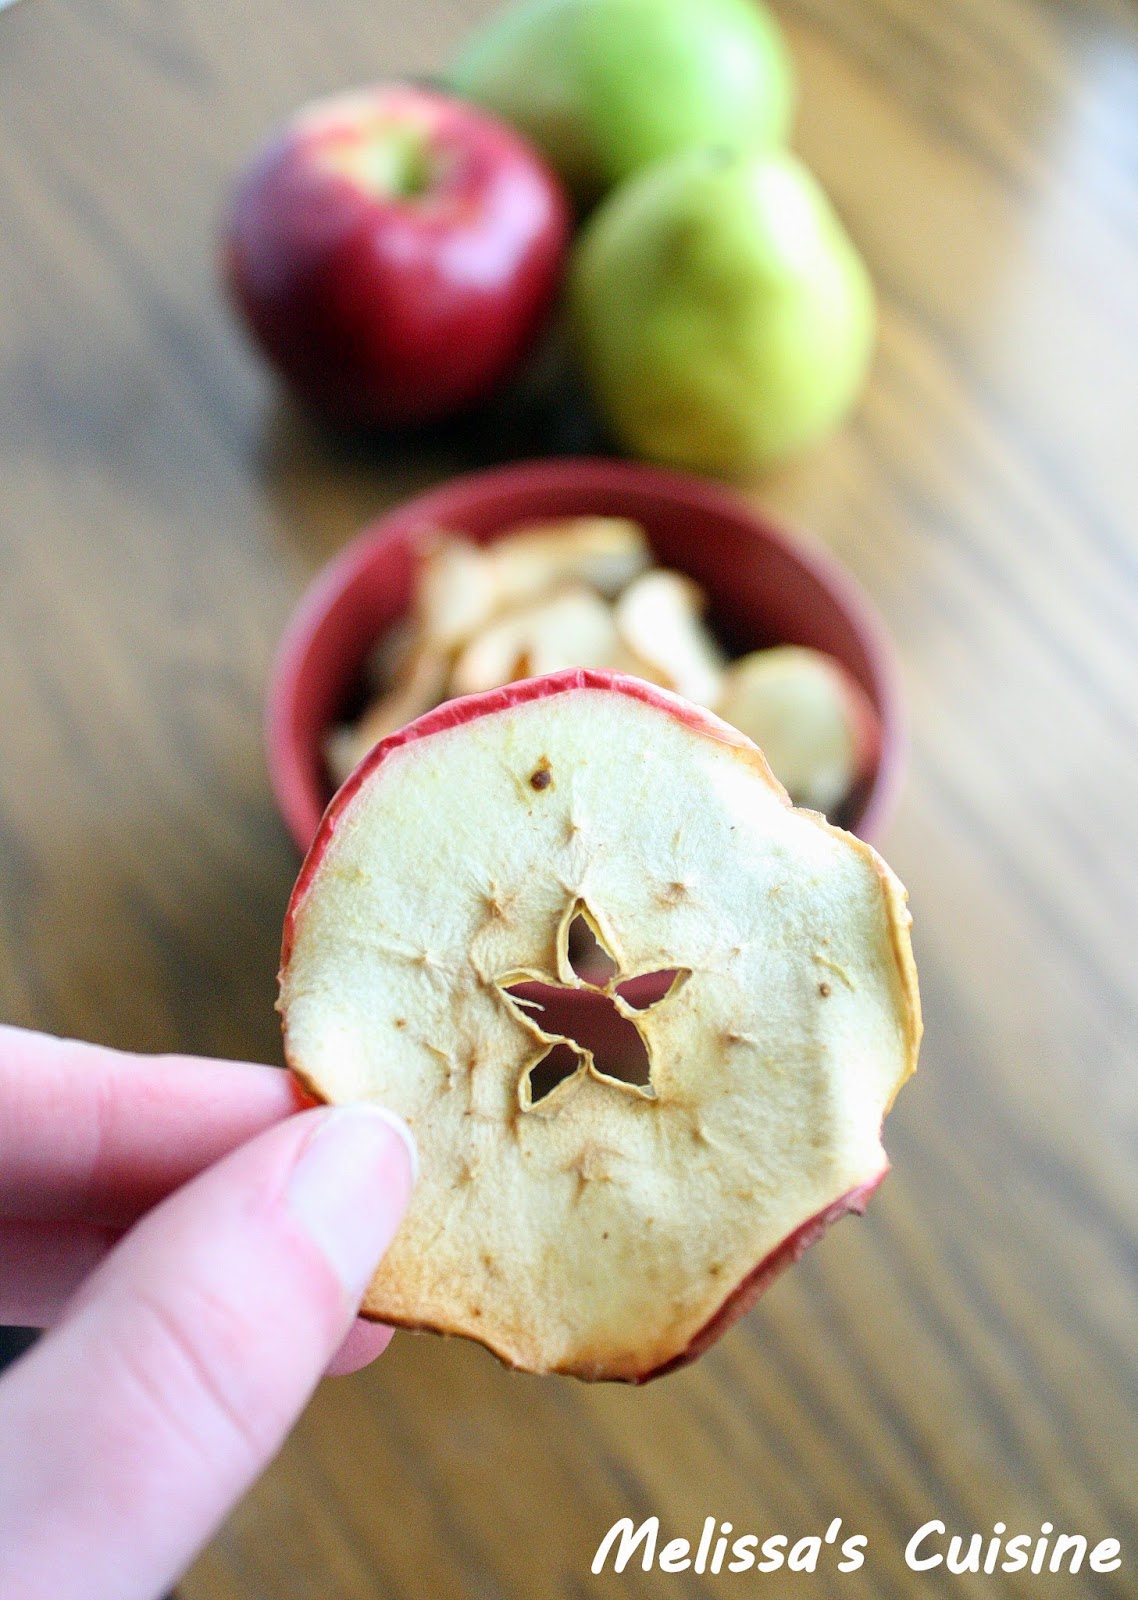 Melissa's Cuisine: Ginger Pear and Apple Chips